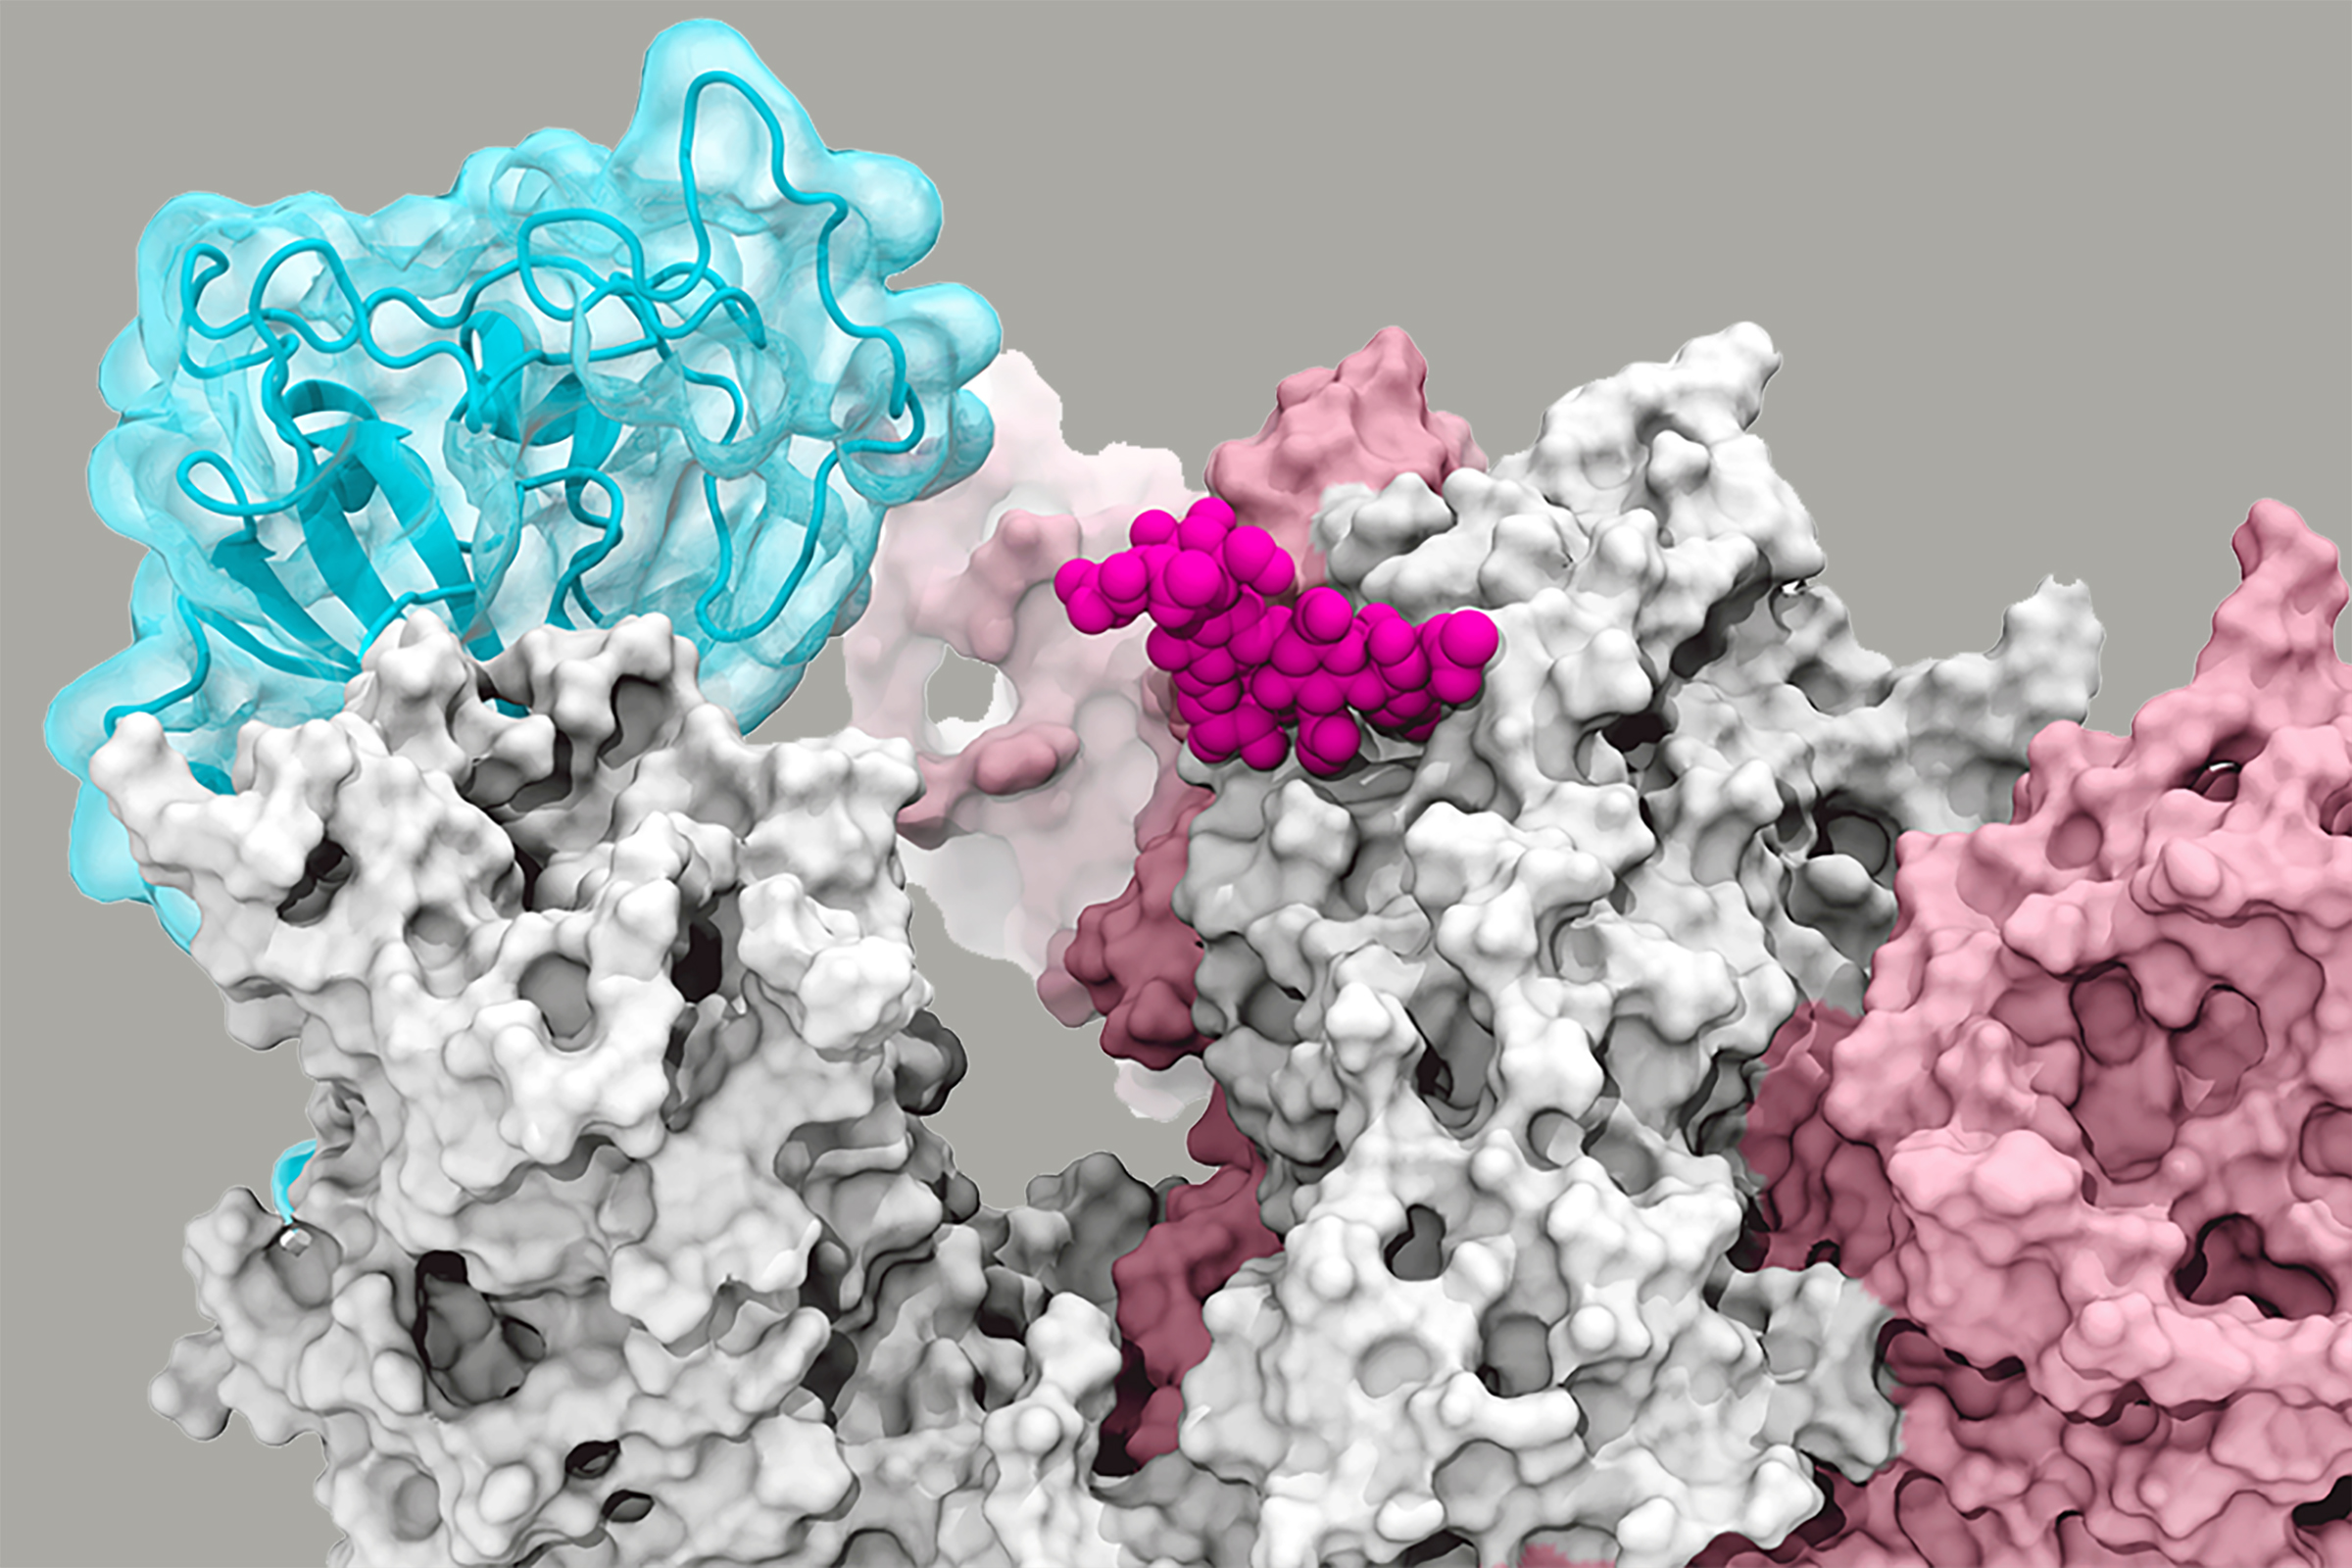 Simulation Reveals How a SARS-CoV-2 Allow COVID Infection